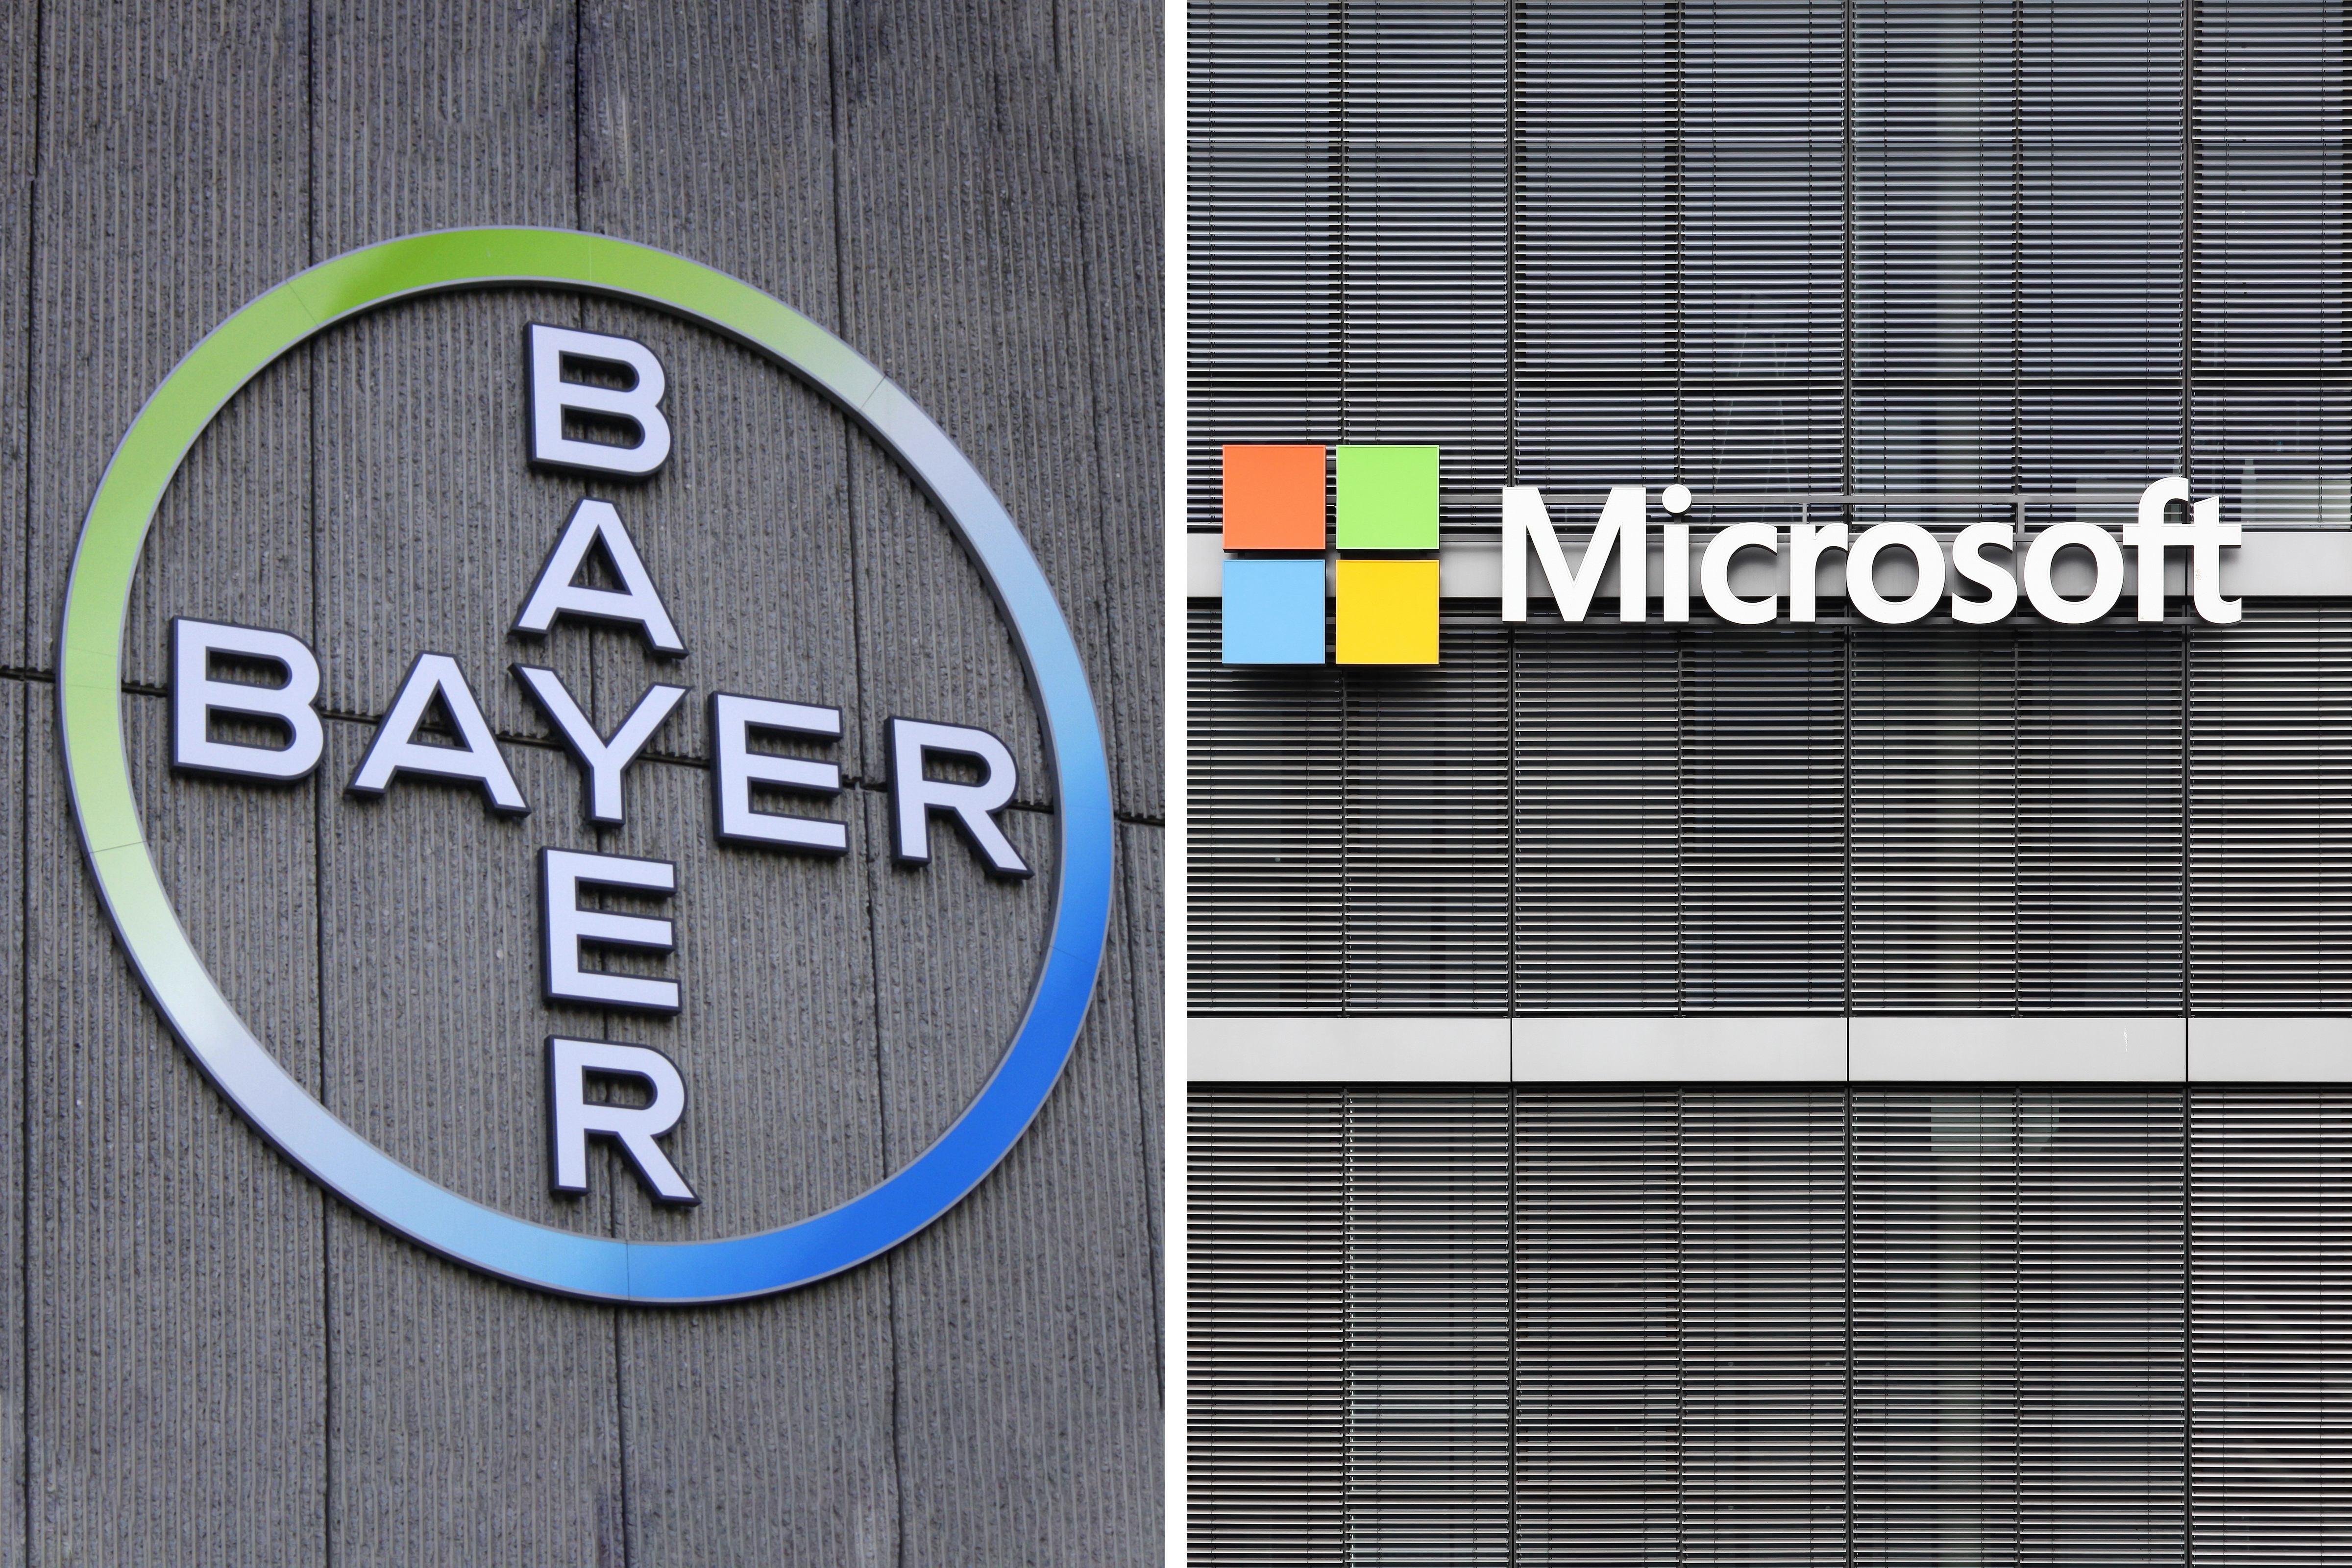 Bayer announces strategic partnership with Microsoft to build digital tools and data science solutions